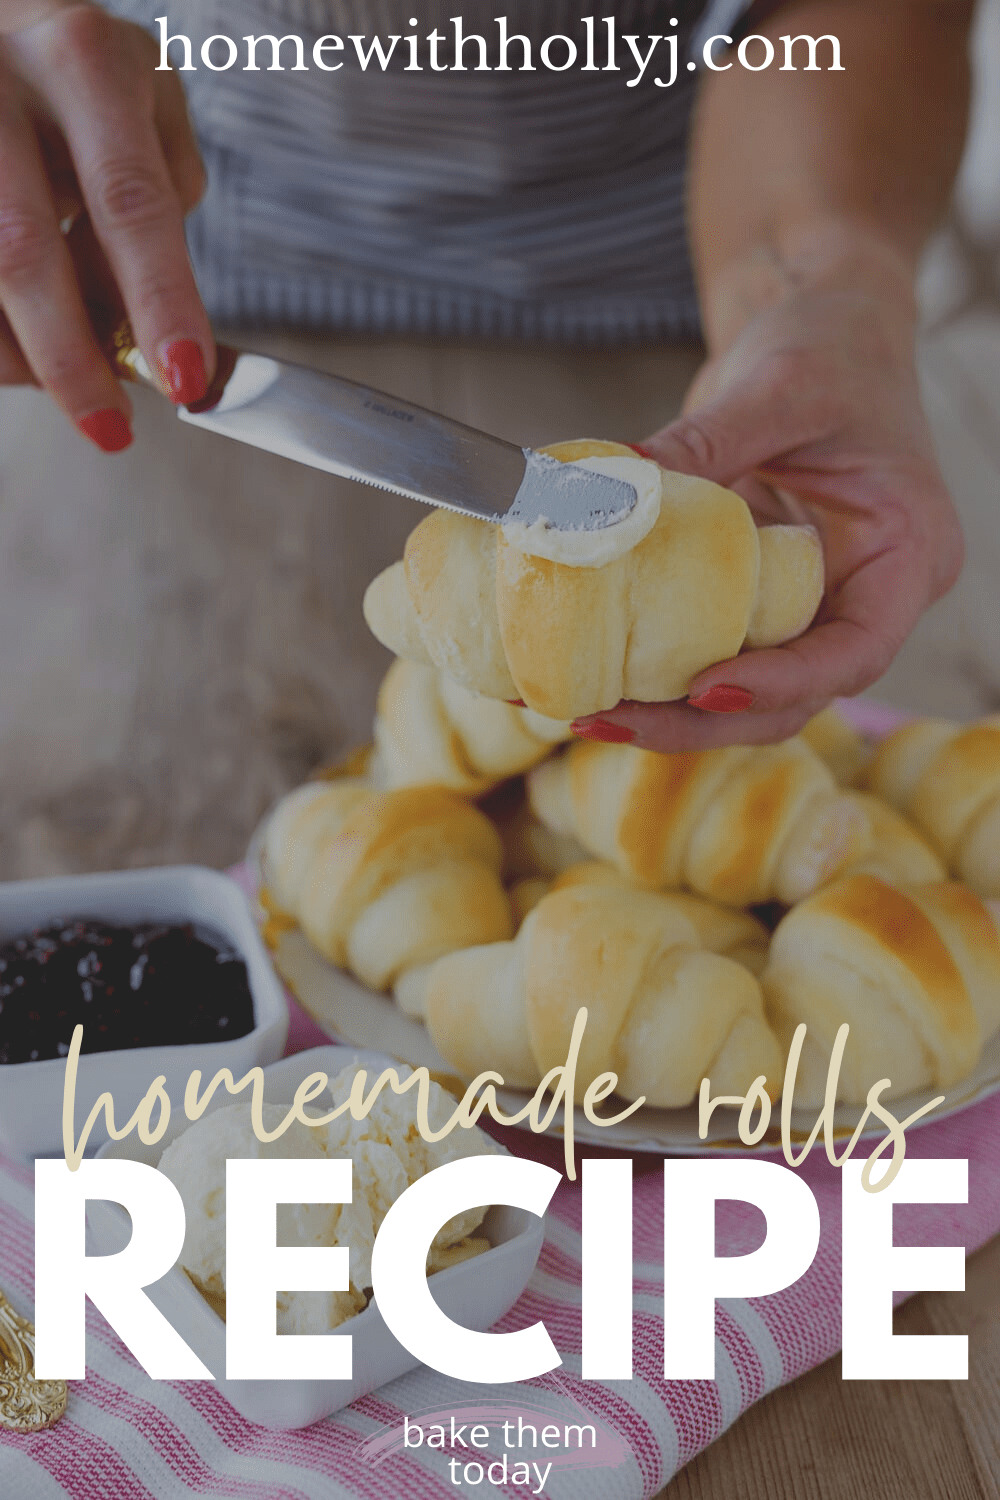 Sharing my family's favorite warm homemade rolls recipe and how to make these delicious rolls with butter and jam. Get the recipe here.